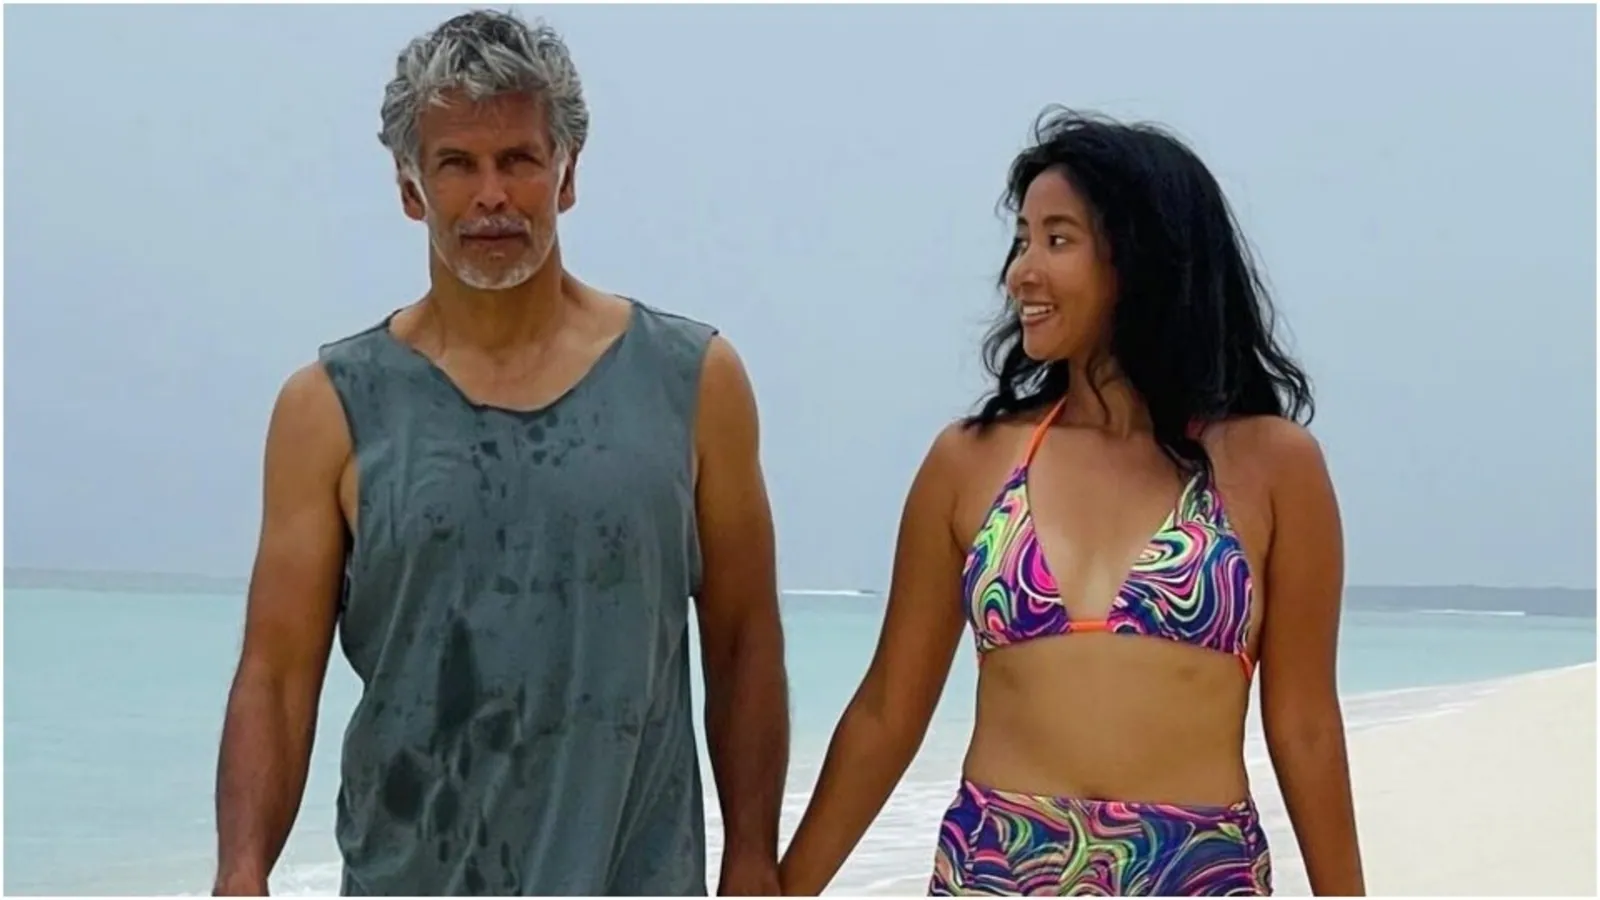 Ankita Konwar drops romantic pic featuring Milind Soman with adorable note, fan says ‘Can’t beat this chemistry’